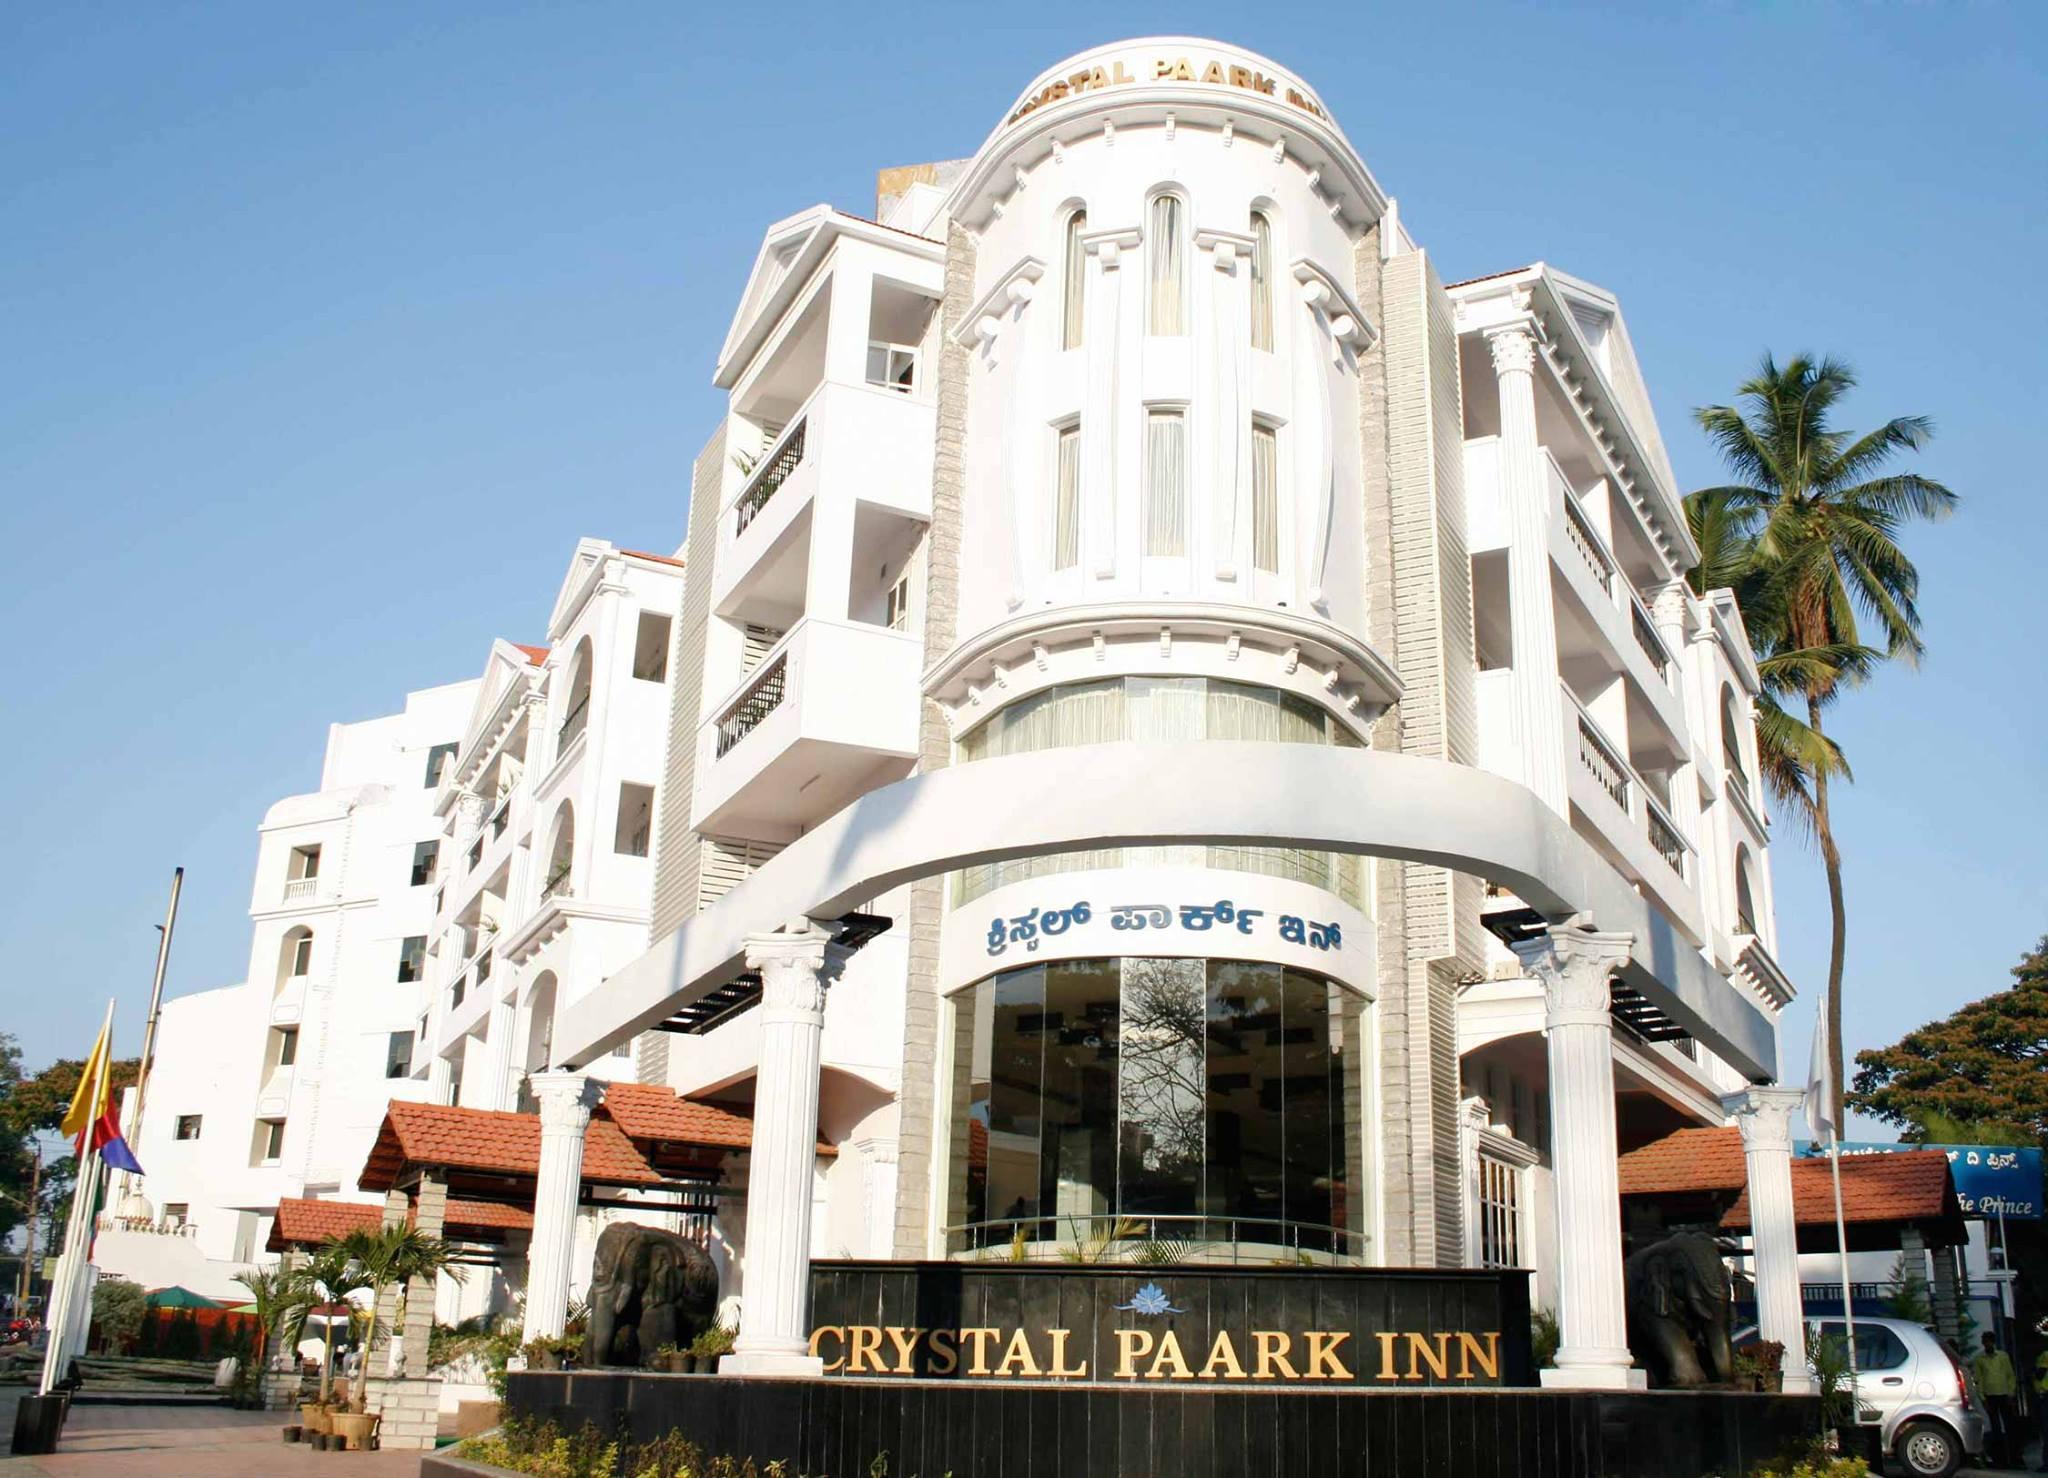 Crystal Paark Inn By Blu Orchid Groups - Mysore